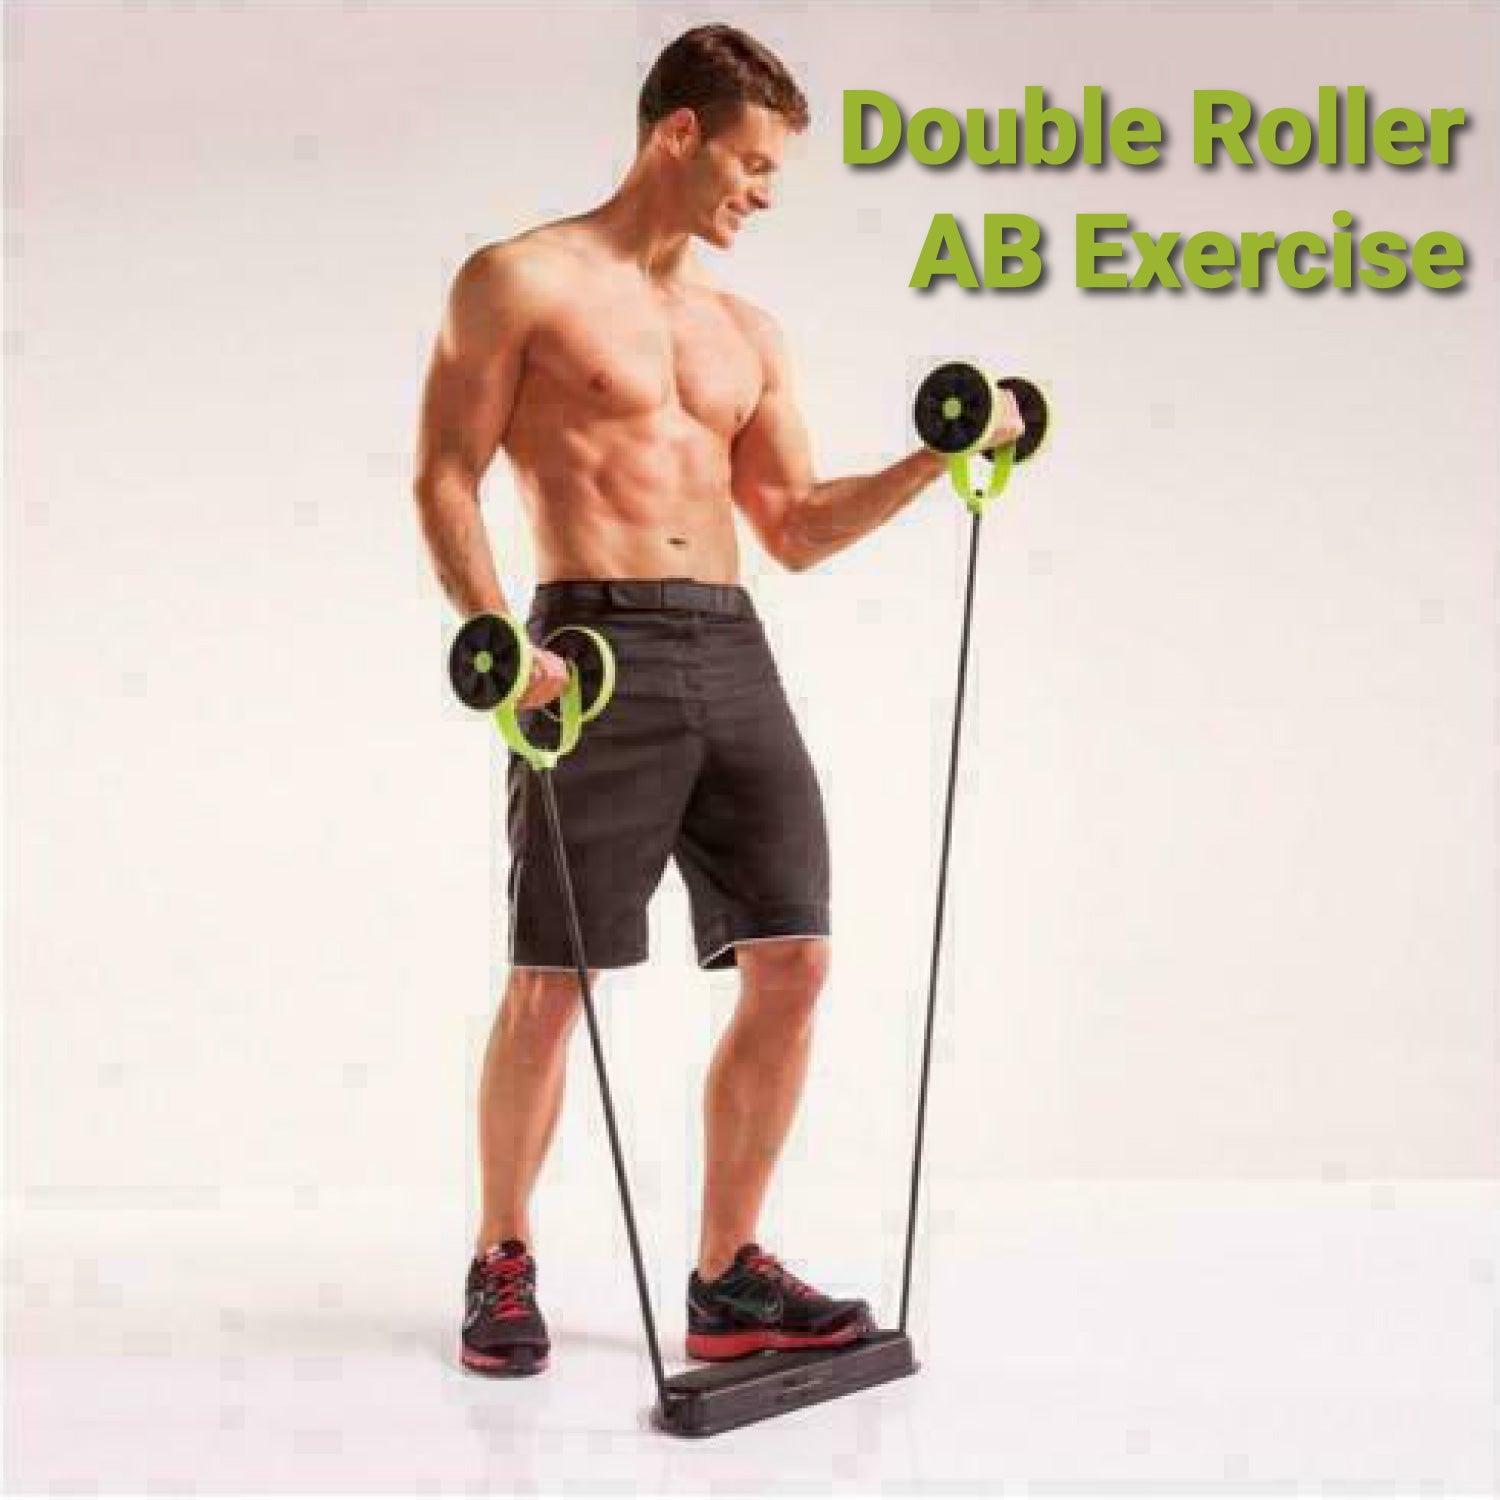 Ab Roller Workout